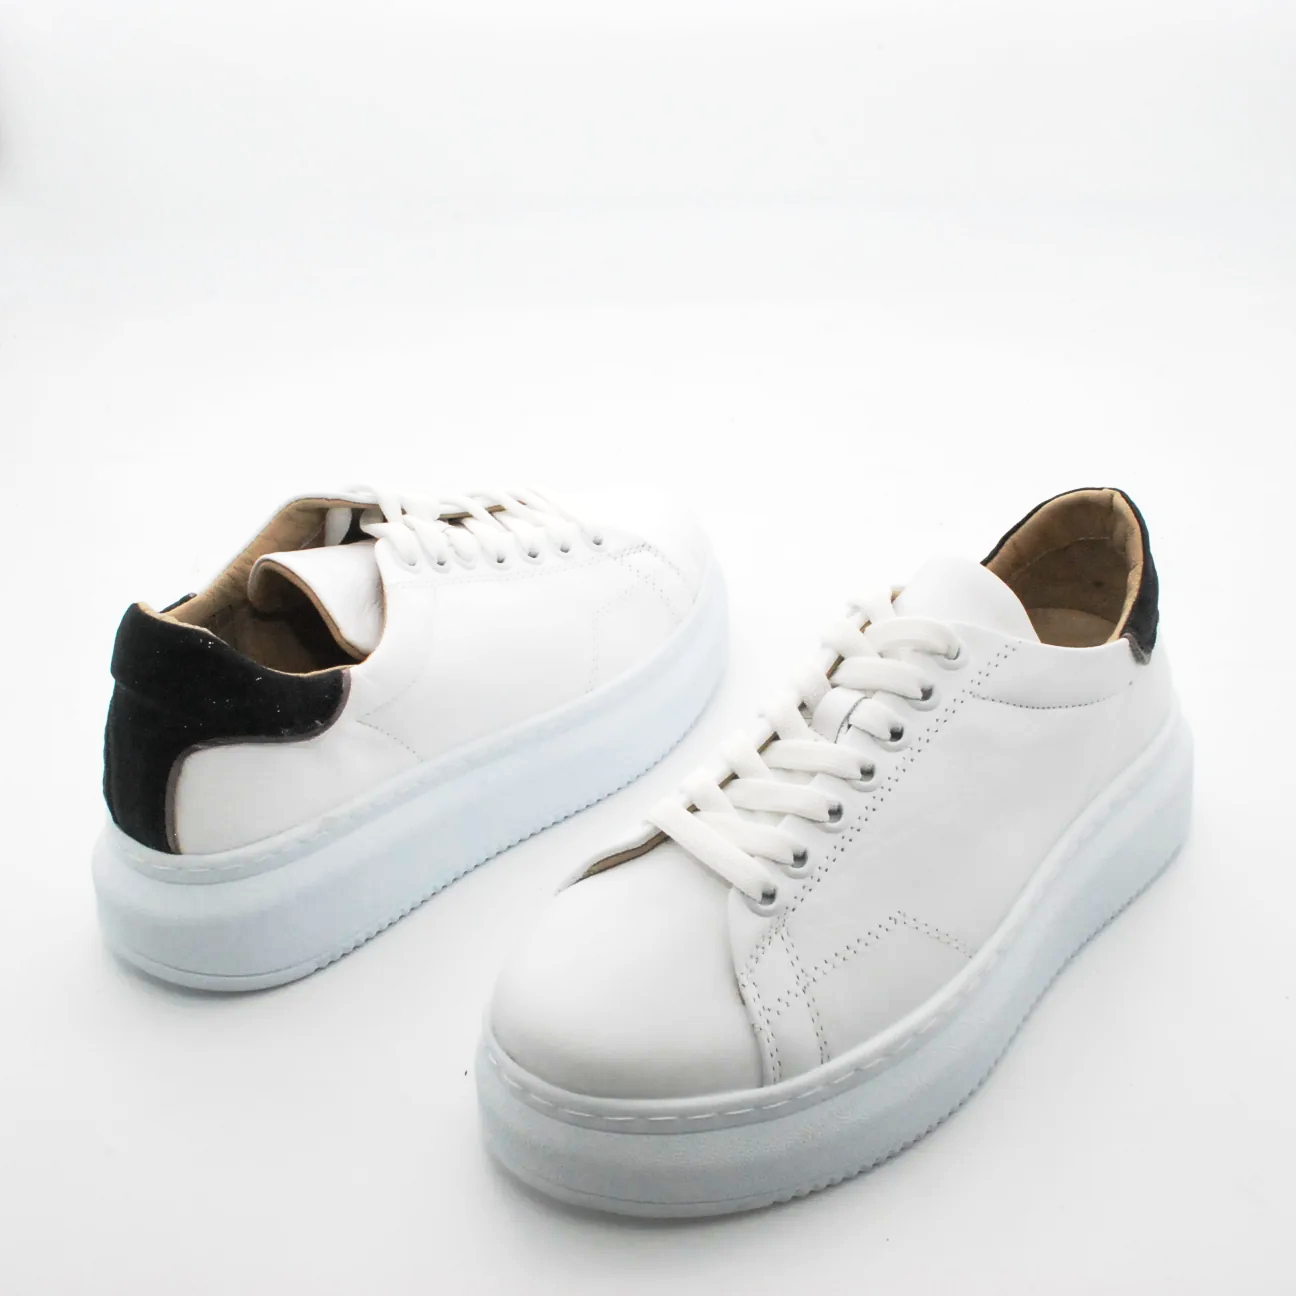 sneakers-wave-in-pelle-sneakers-2_cb2803e4-a81c-4907-b5c4-10db16cbb456.png